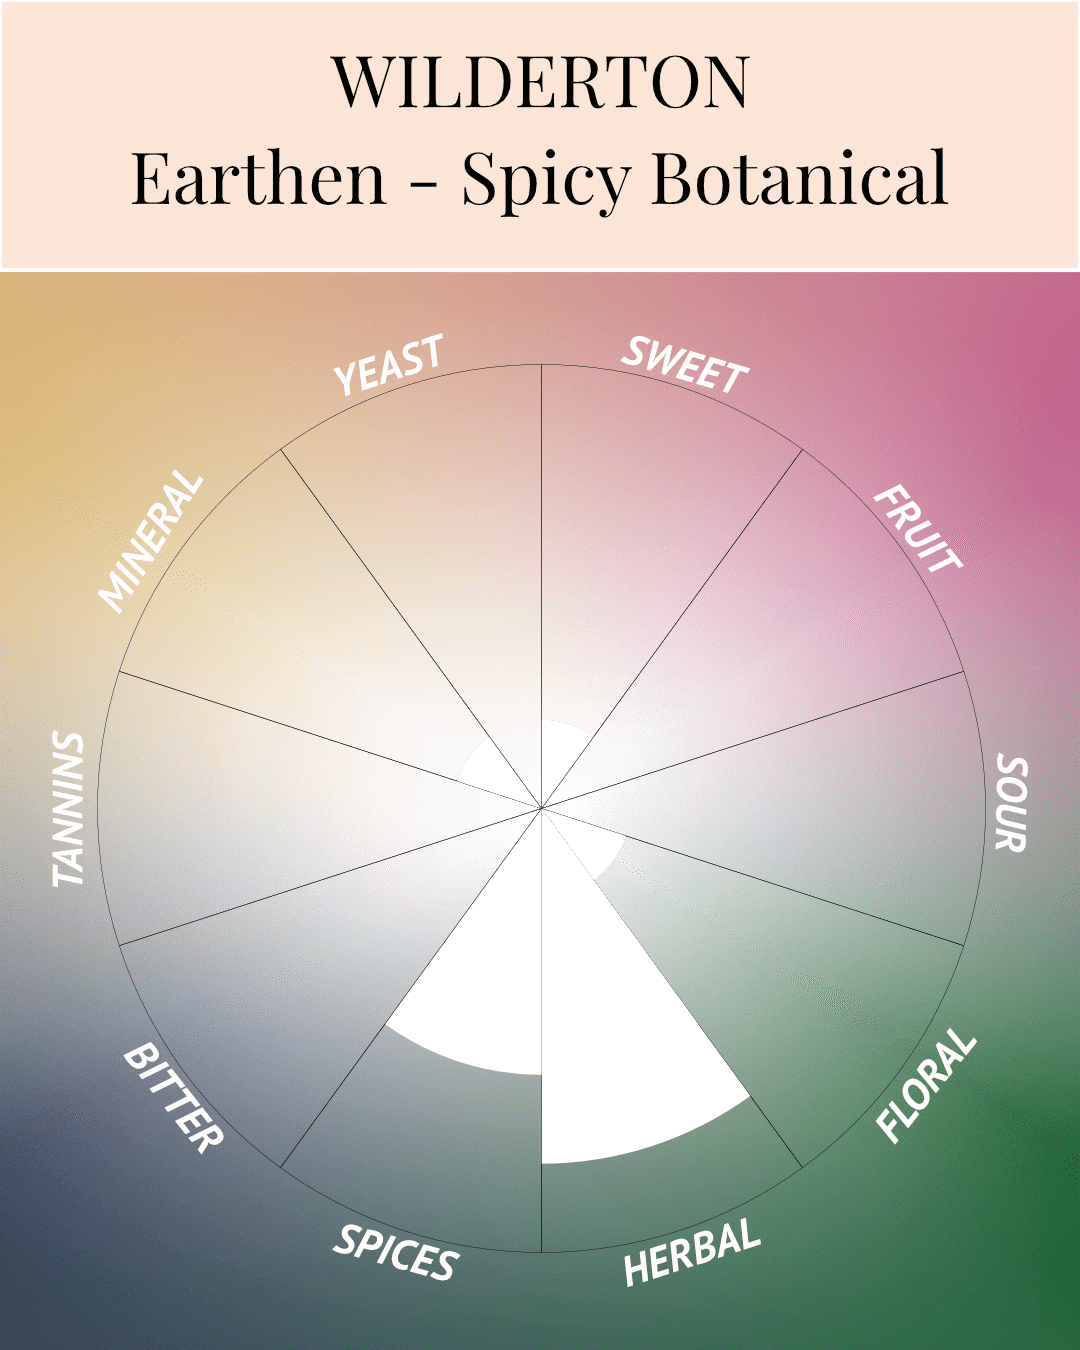 This graph of the flavor profile highlights the spicey and herbal notes of the barely sweet Wilderton Earthen.